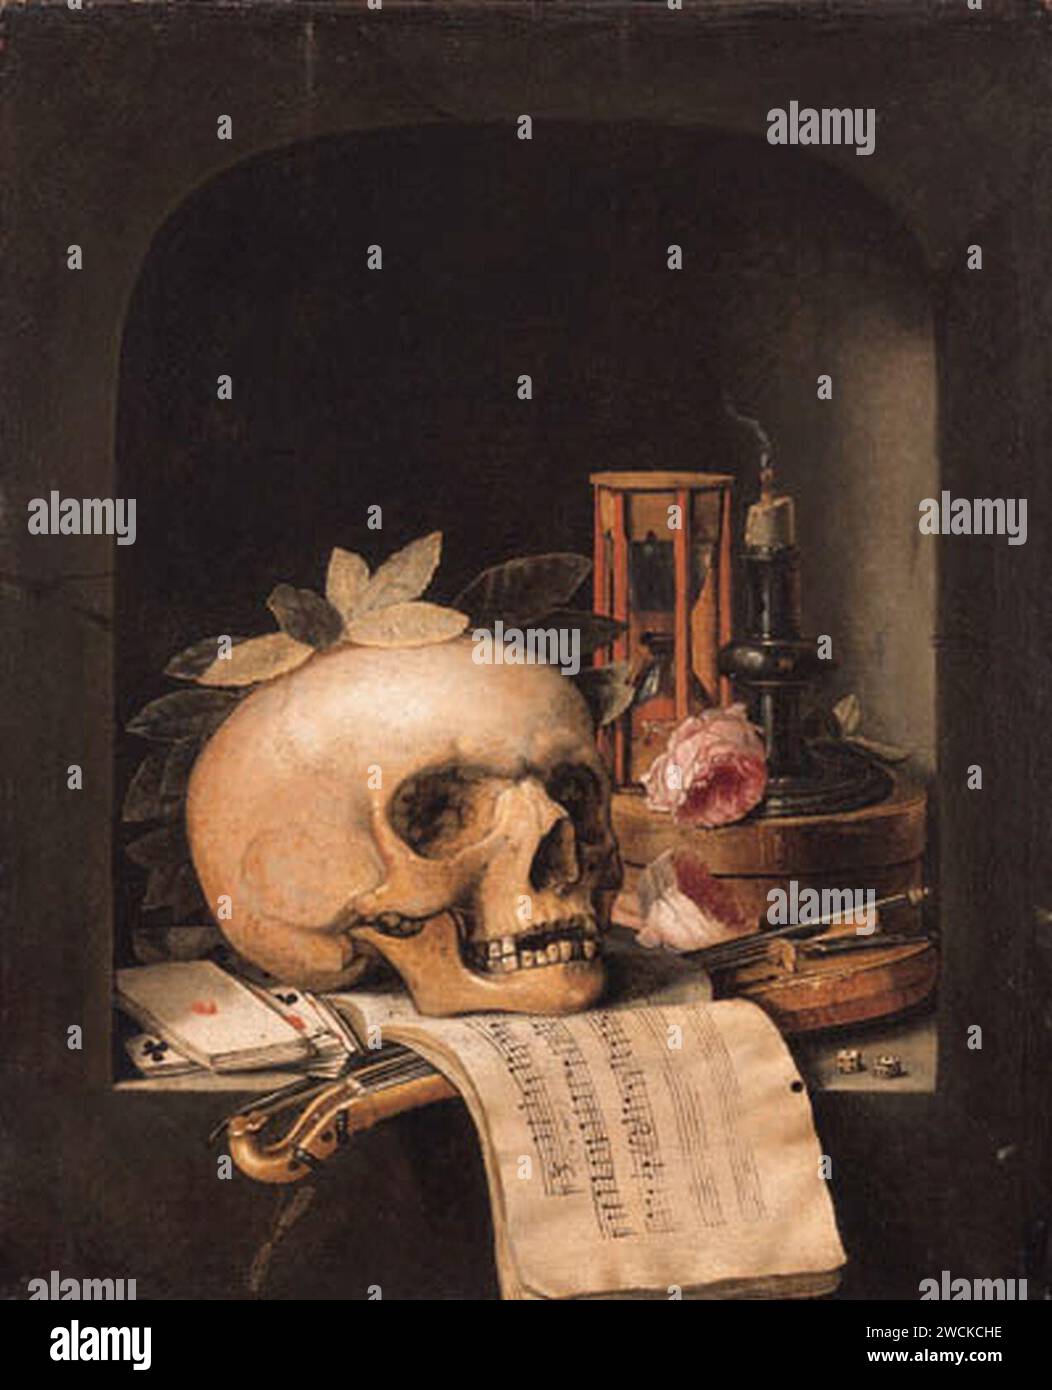 A vanitas still life with a wreathed skull, a Pochette violin and a bow, a deck of cards, a musical score, a pair of dice, a box inscribed poudre de civet, two roses, an hourglass and a snuffed-out candle in a niche112332). Stock Photo